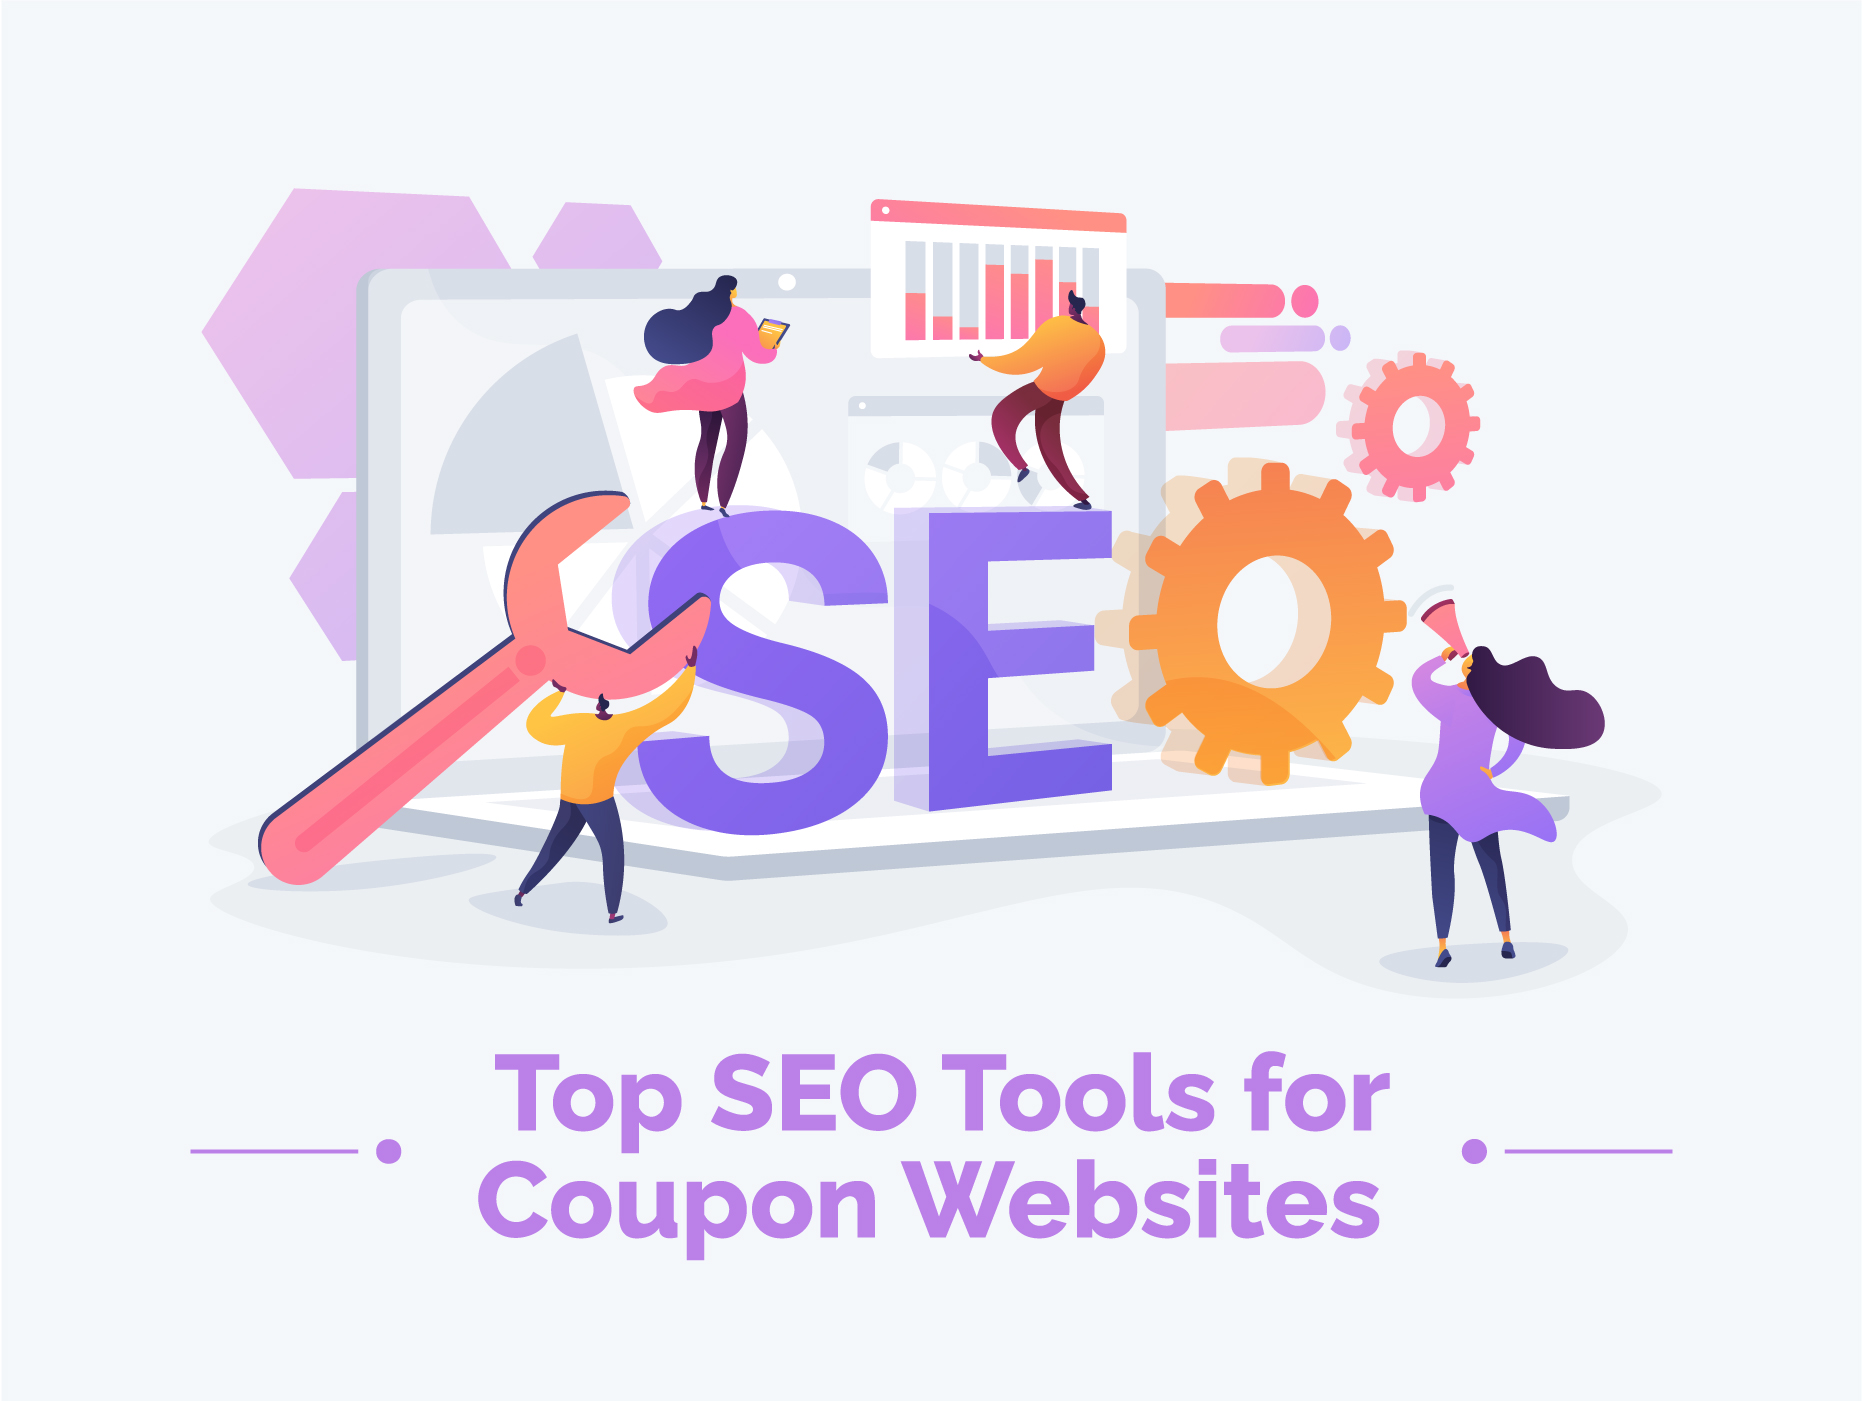 Top SEO Tools for Coupon Websites